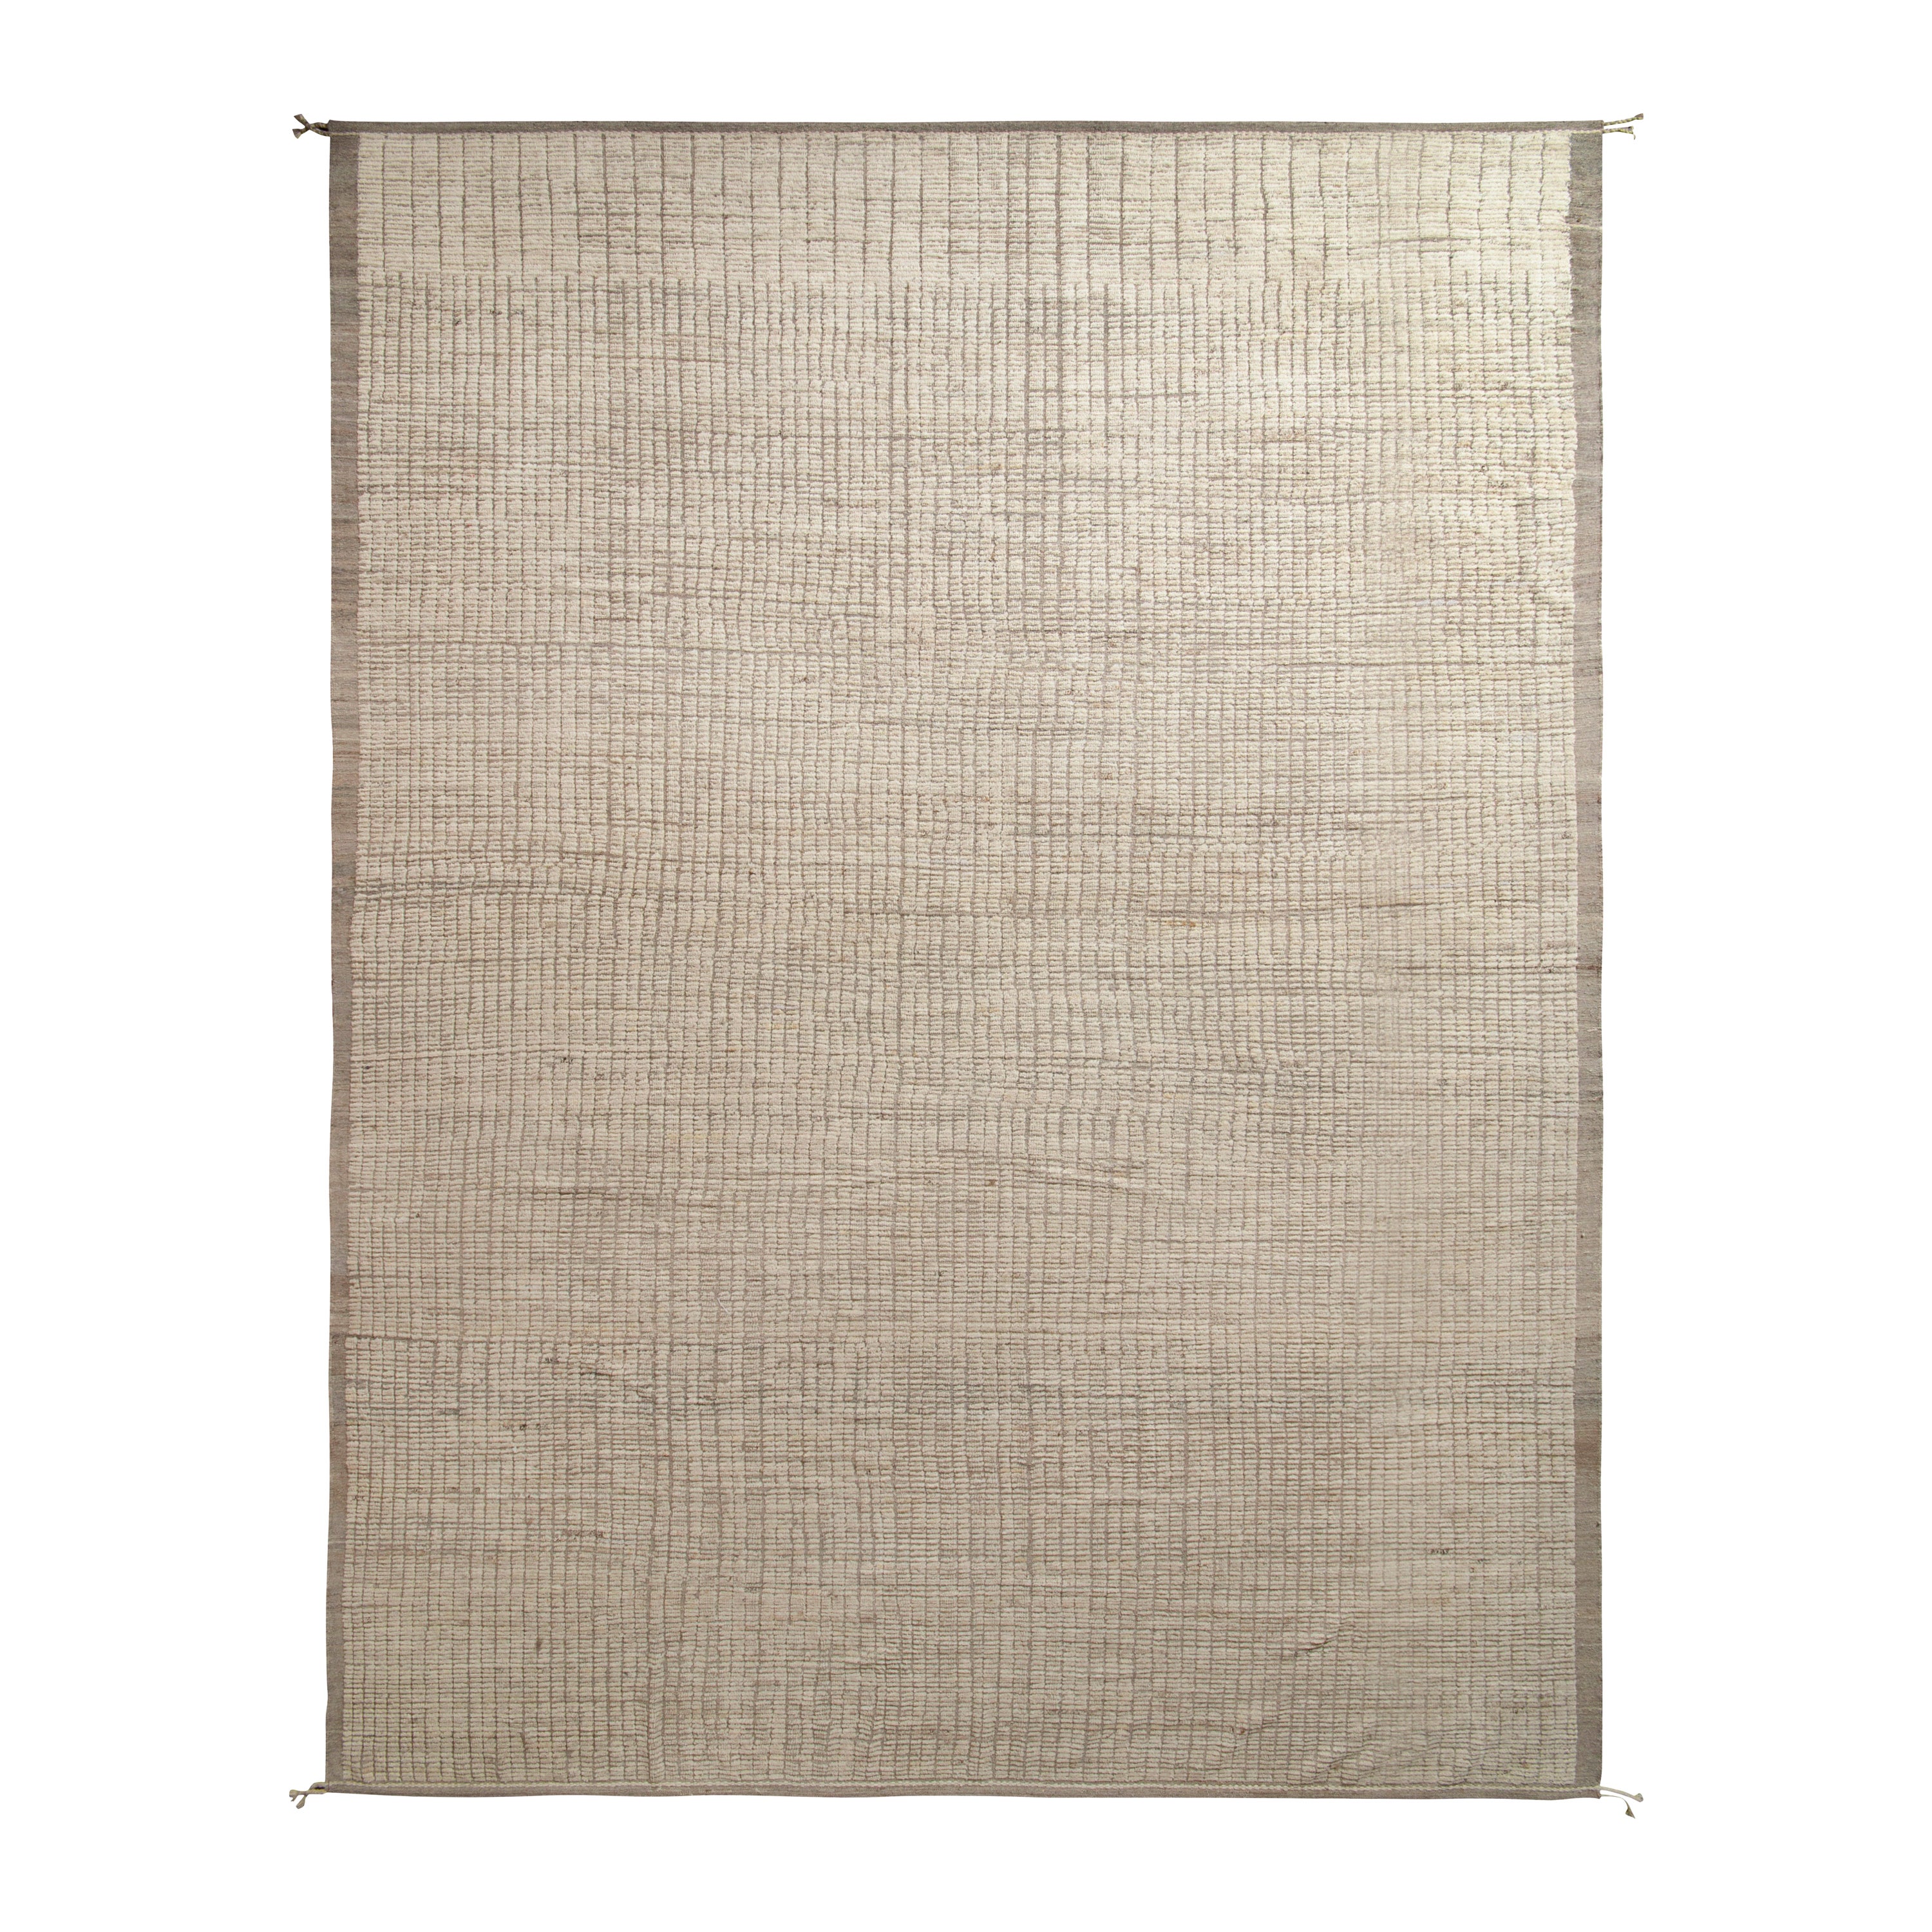 Rug & Kilim’s Moroccan Style Rug in White, Beige Brown High-Low Pattern For Sale